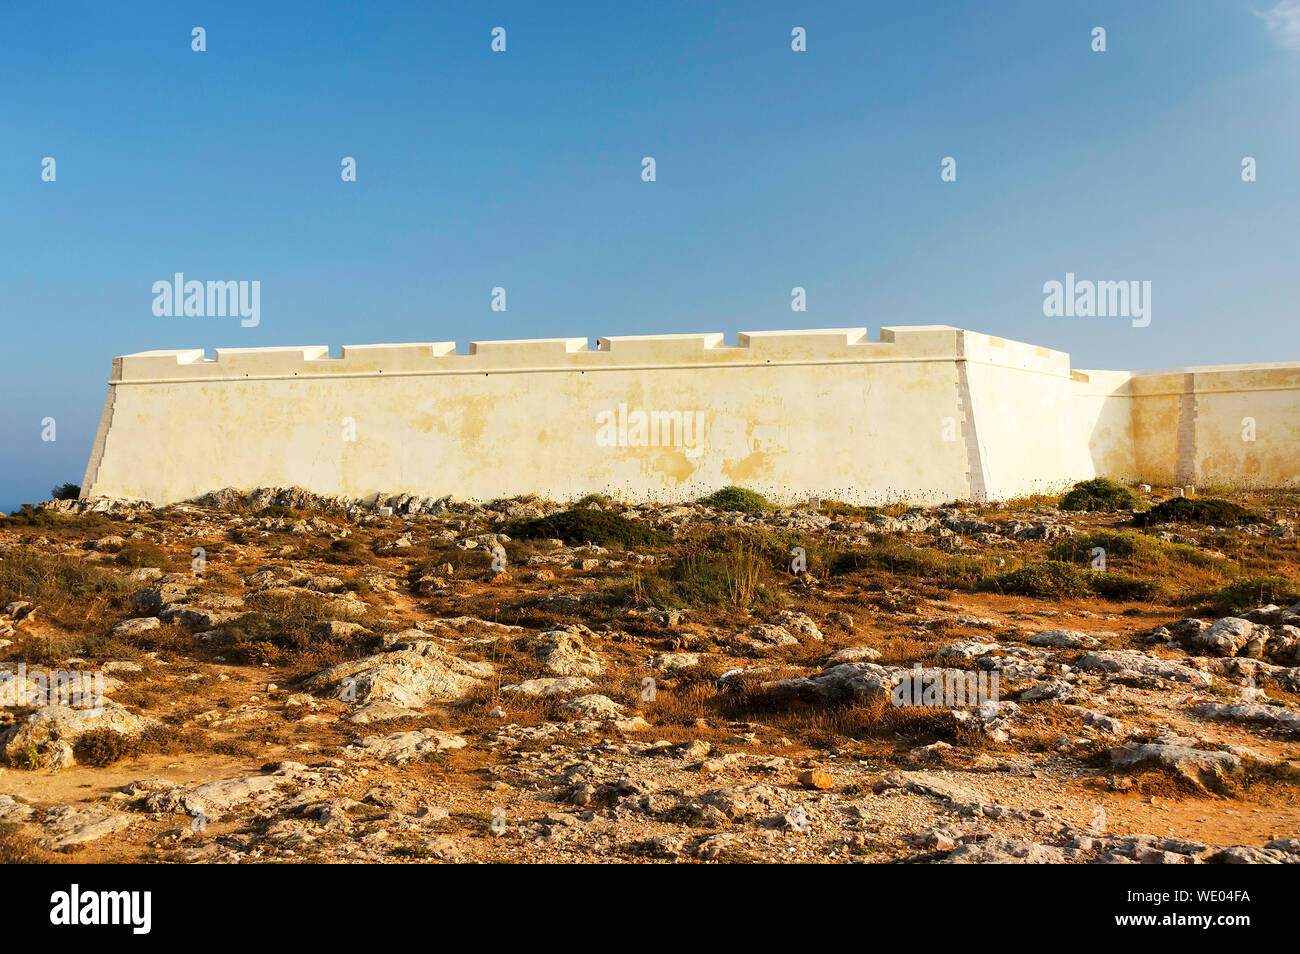 Surrounding Wall Against Clear Blue Sky Stock Photo